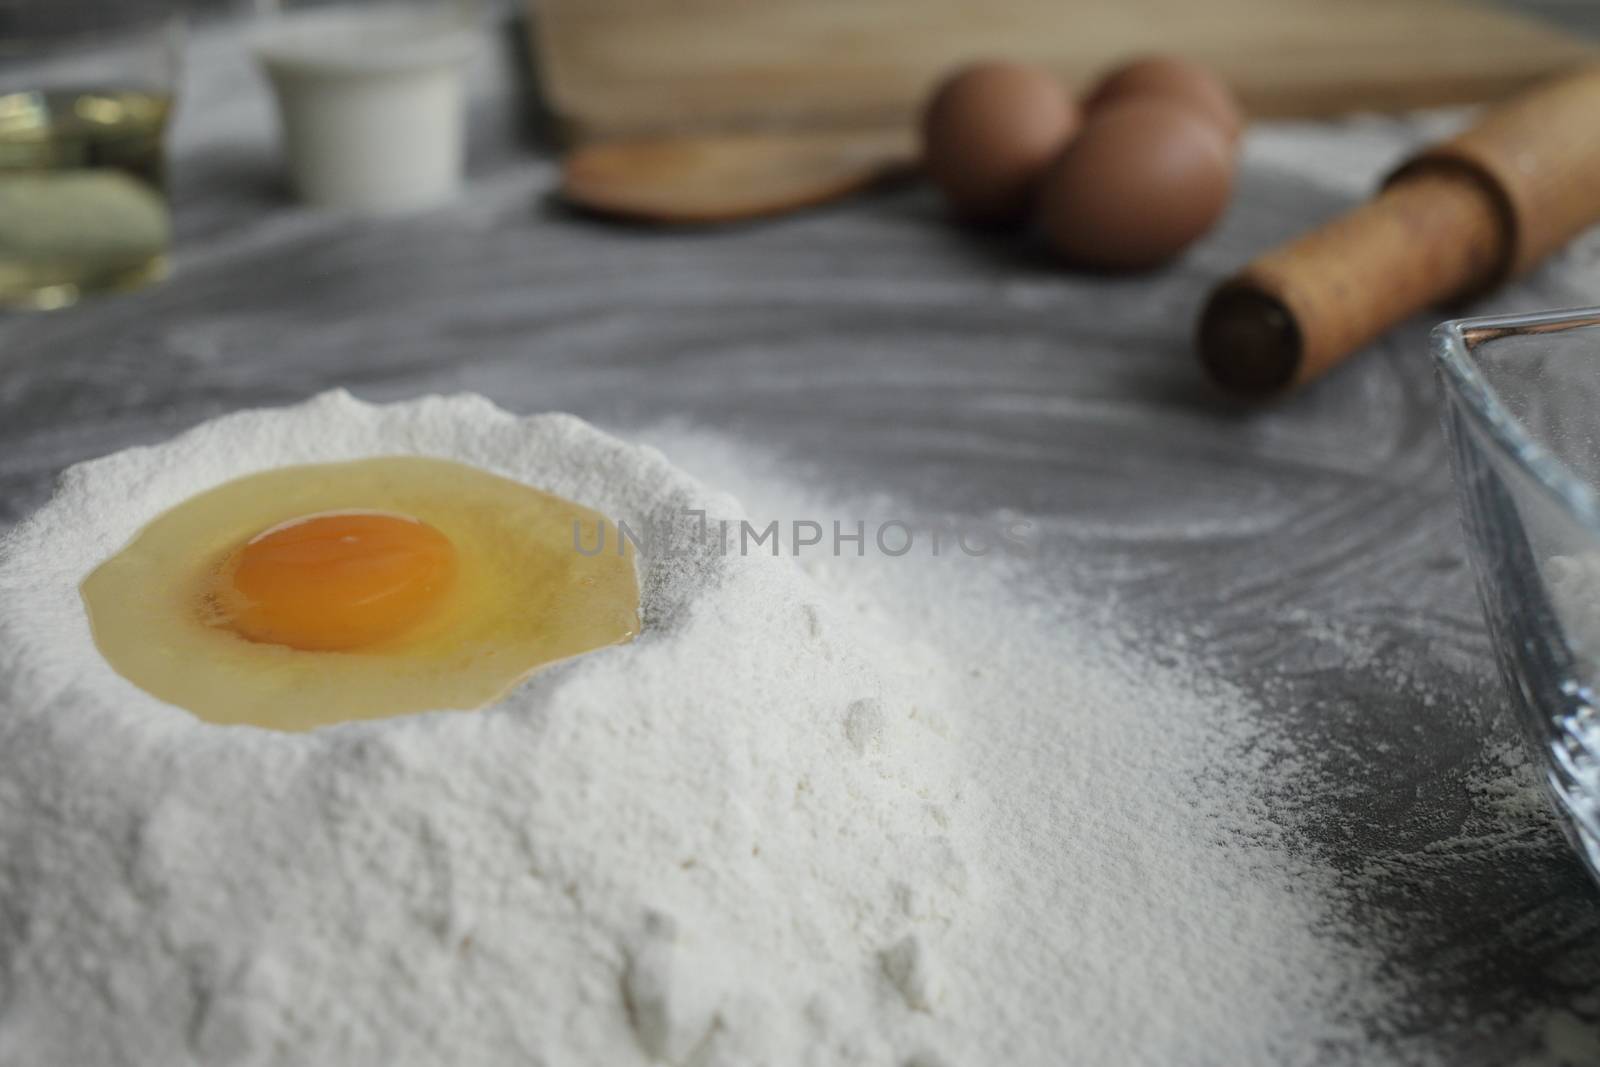 Broken chicken egg in a pile of flour, olive oil, milk, kitchen tool, gray table by selinsmo